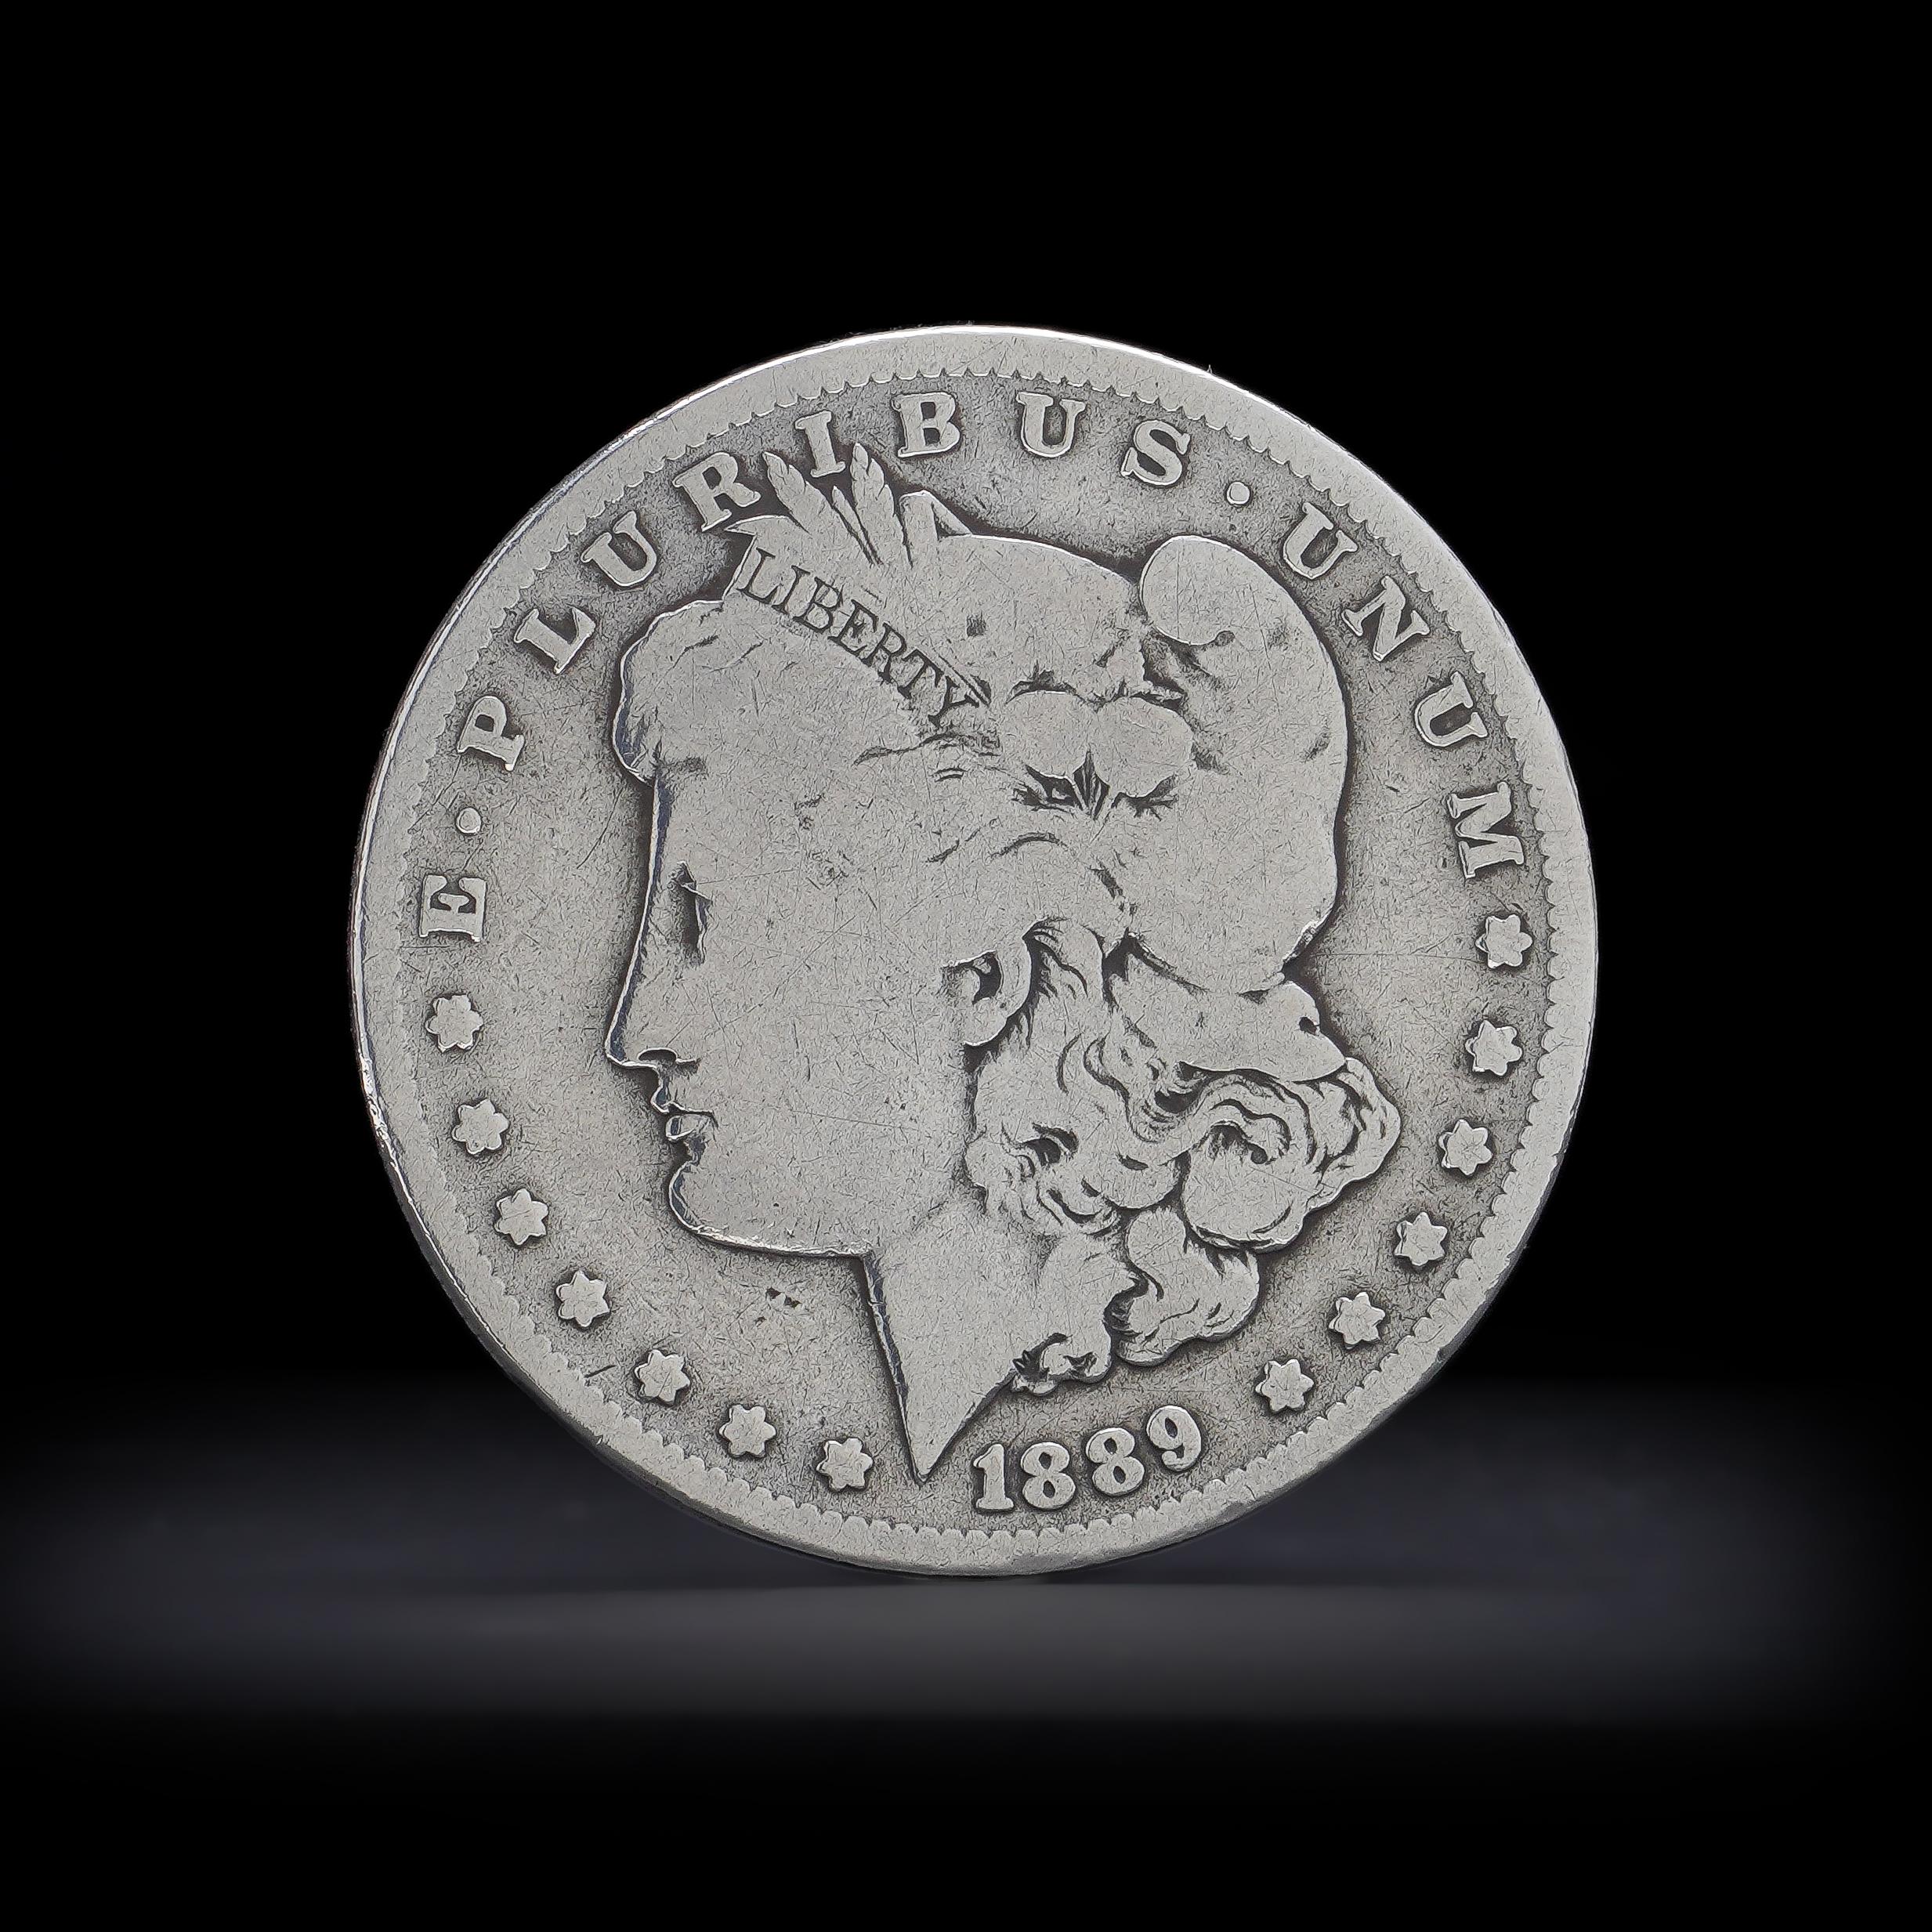 Antique 1889 O Morgan dollar.
Silver fineness: 900/1000
Made in USA, 1889
Mint: New Orleans
Comes with a silver purity certificate.  

1878 is the first year of the popular Morgan dollar series. 

The Morgan Dollar is one of the most famous coins in